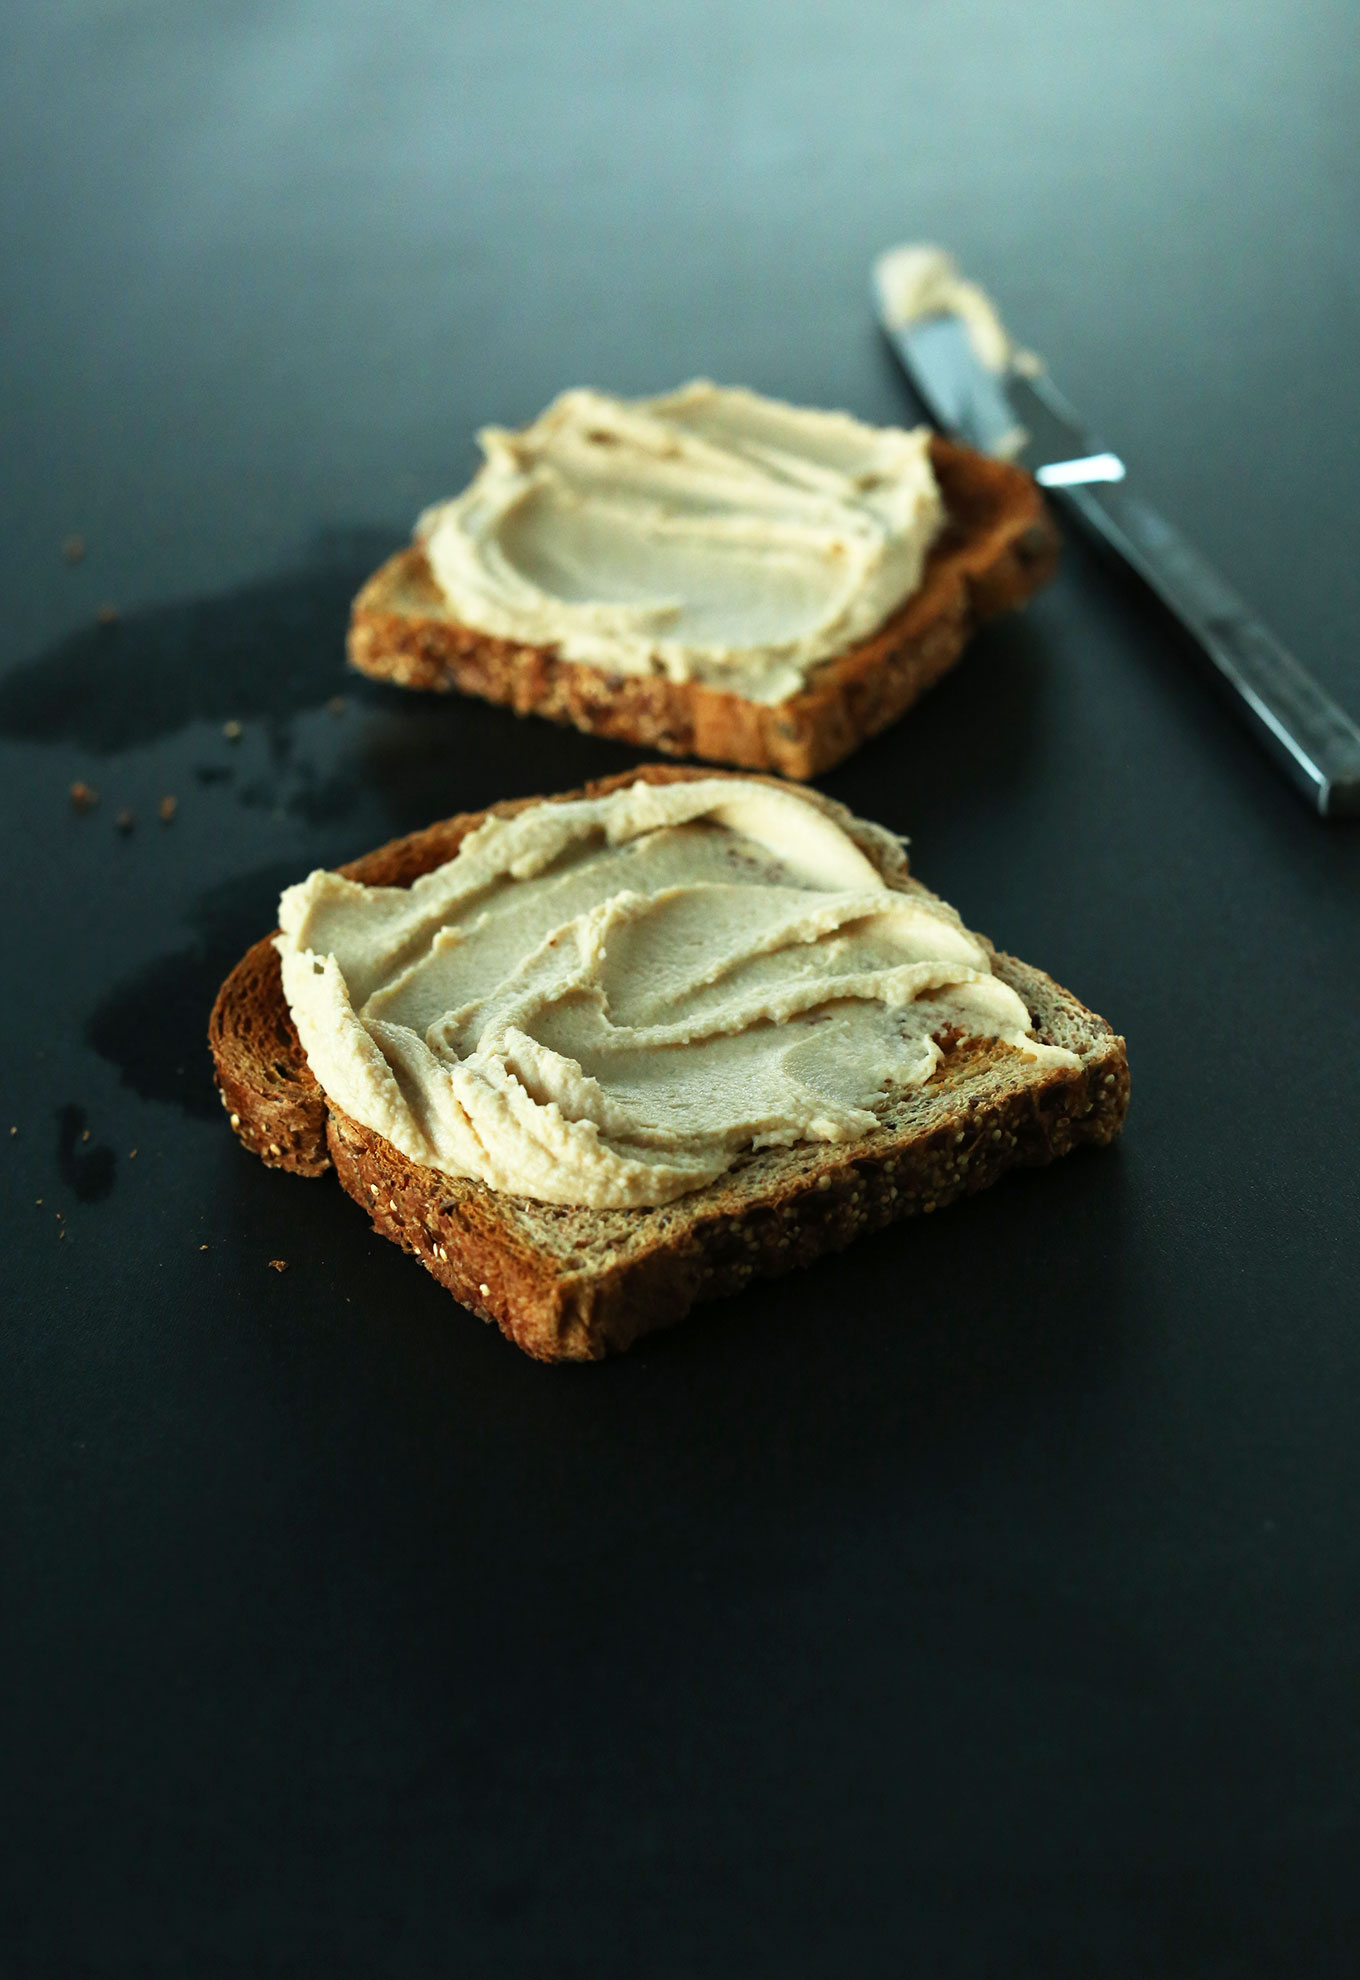 Two slices of toast with hummus for a protein-rich vegan snack